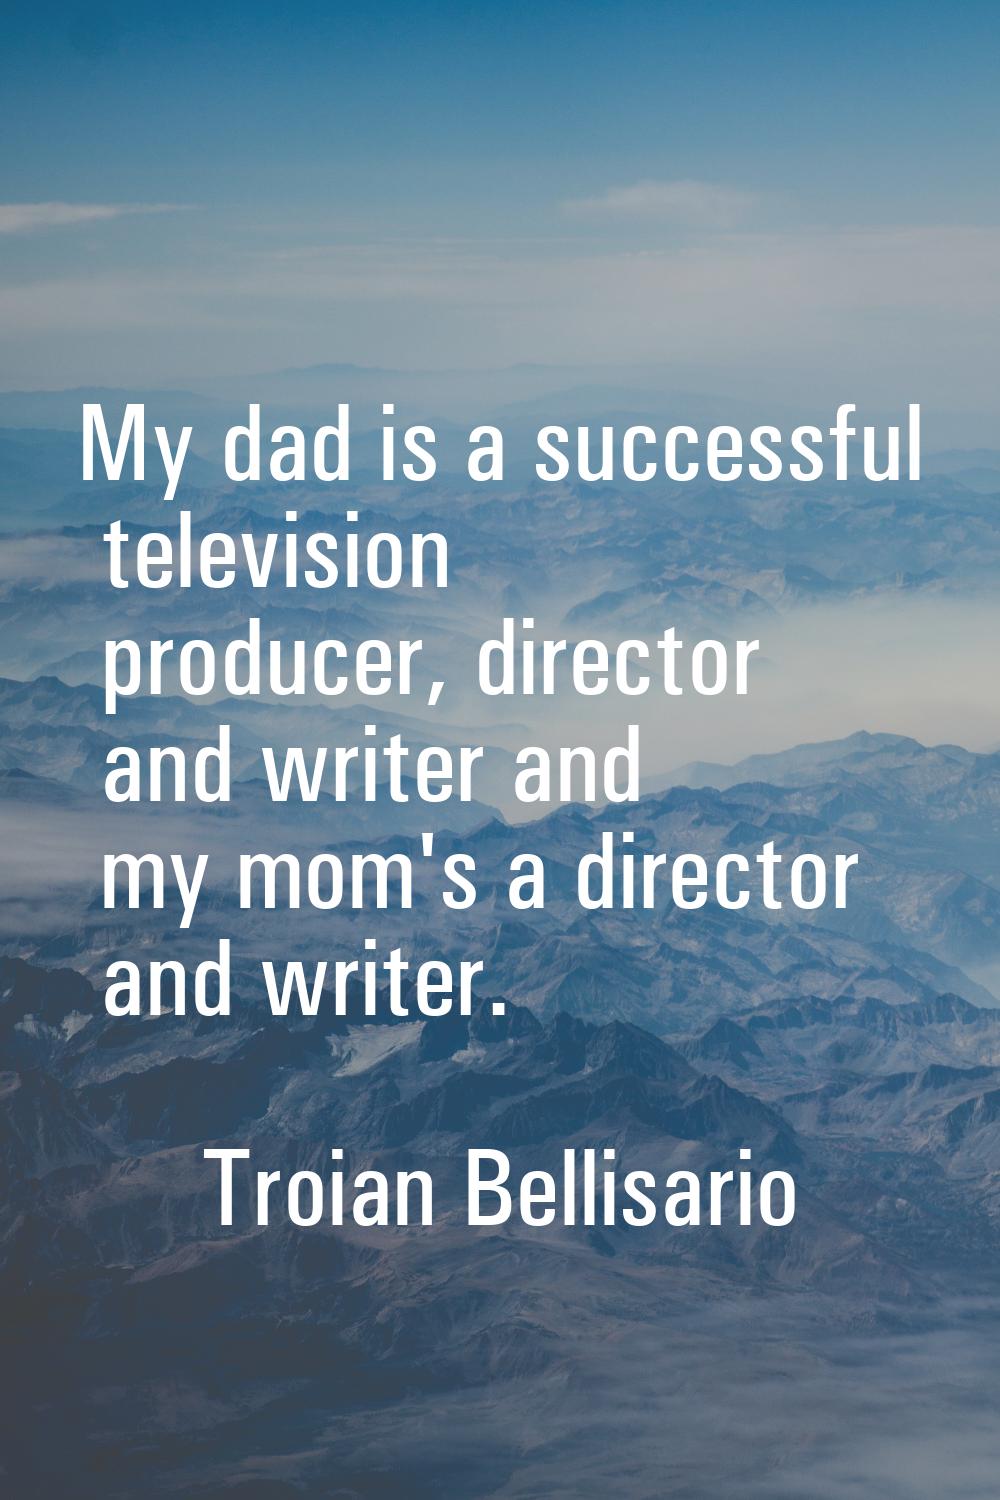 My dad is a successful television producer, director and writer and my mom's a director and writer.